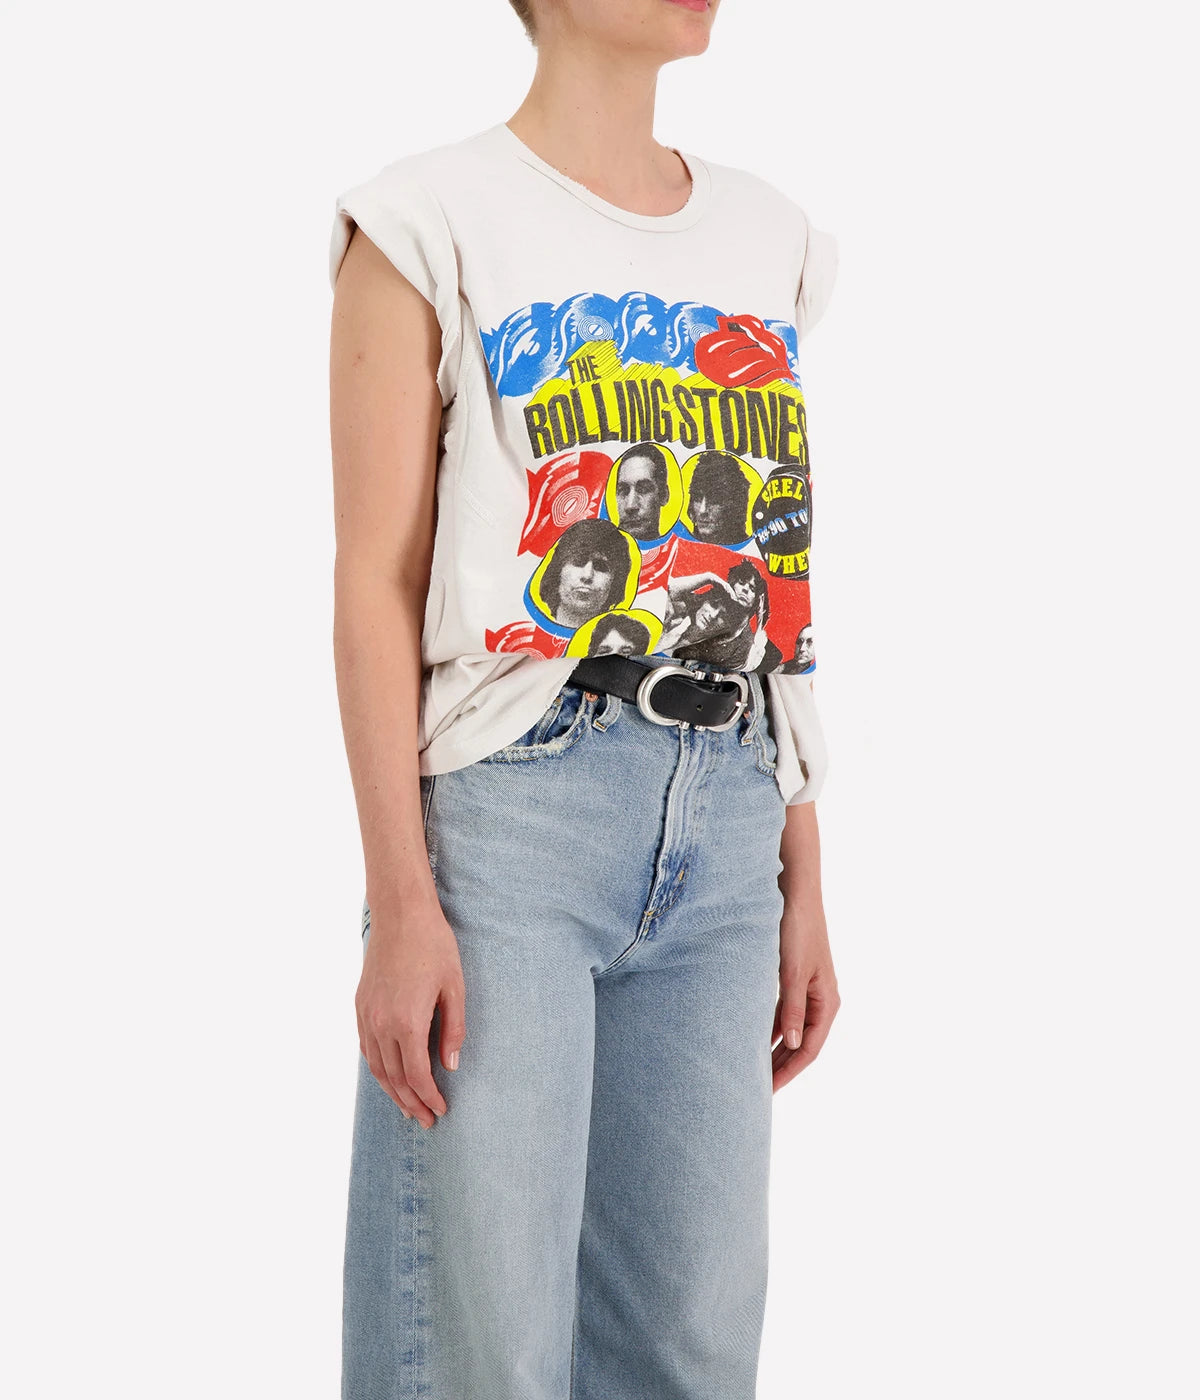 Rolling Stones 1989 T-Shirt in Vintage White